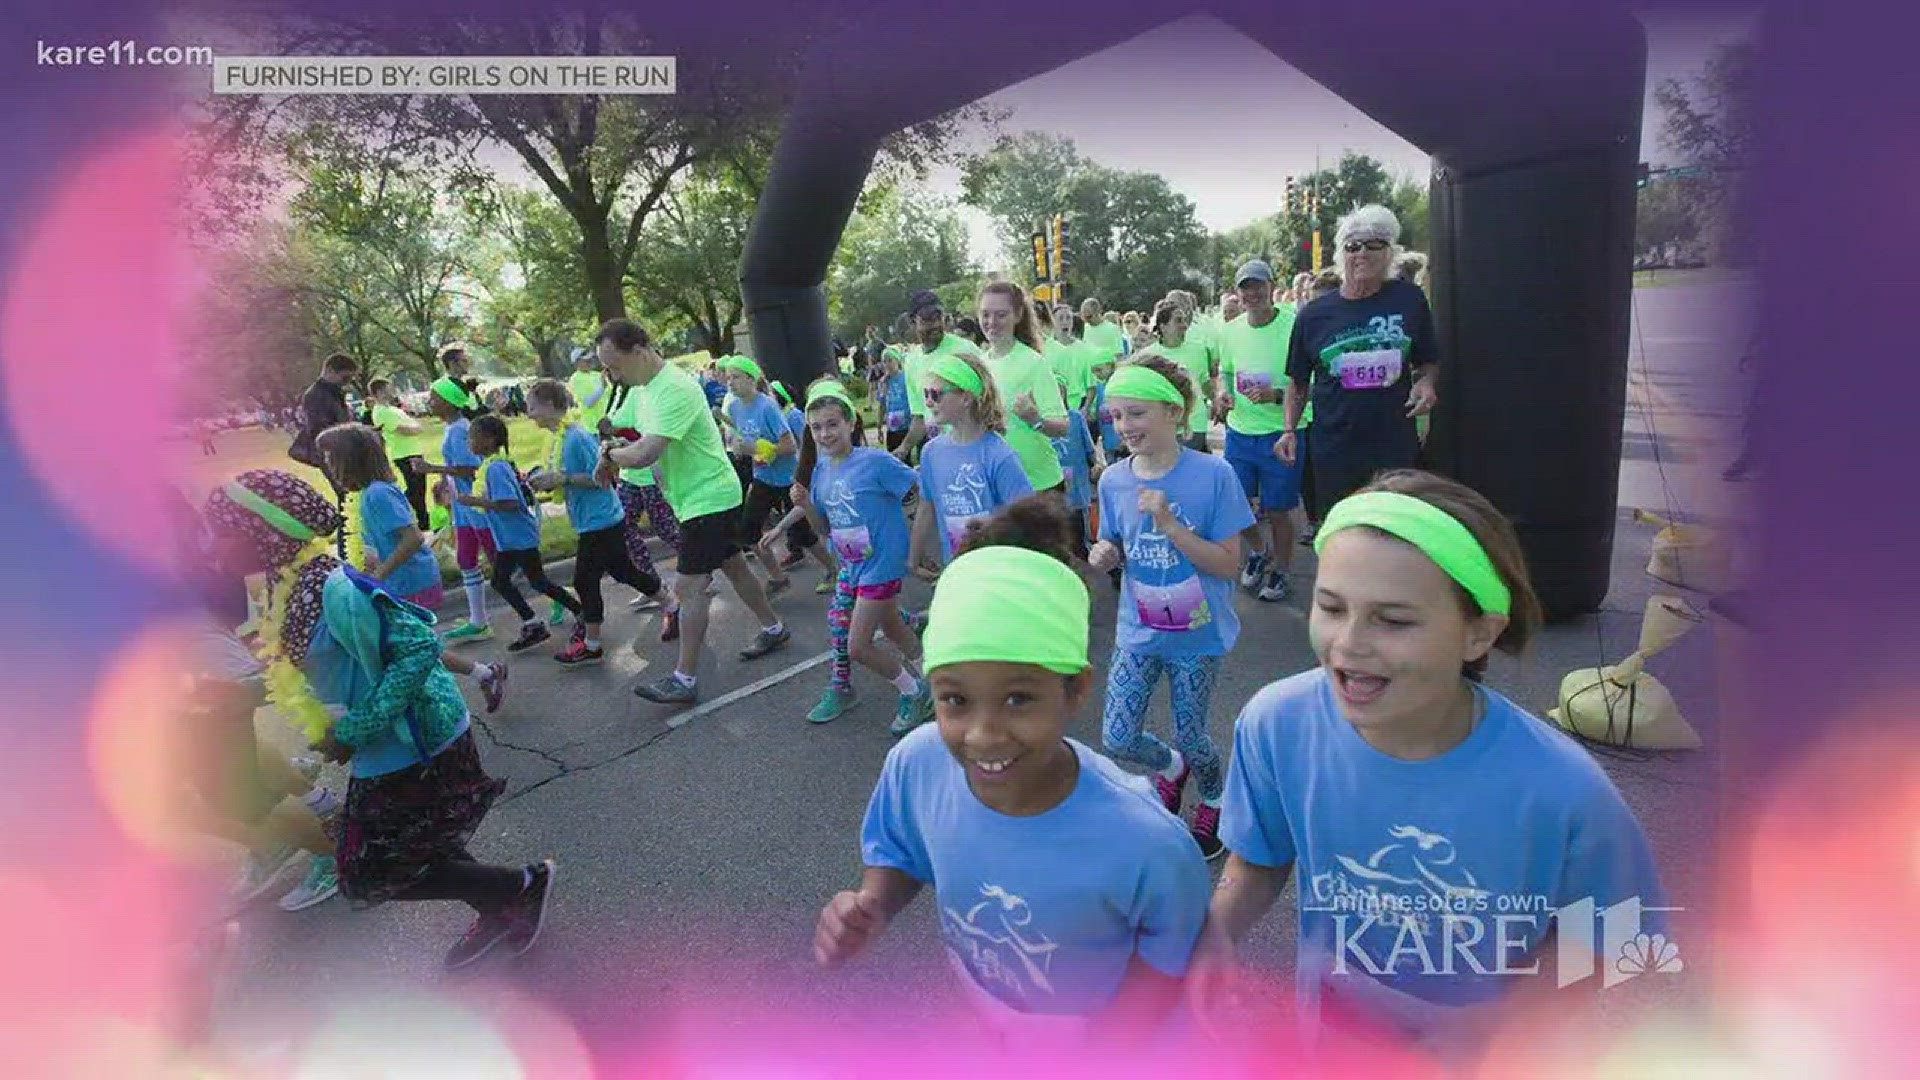 Girls on the Run Twin Cities is dedicated to inspiring girls to be joyful, healthy and confident.